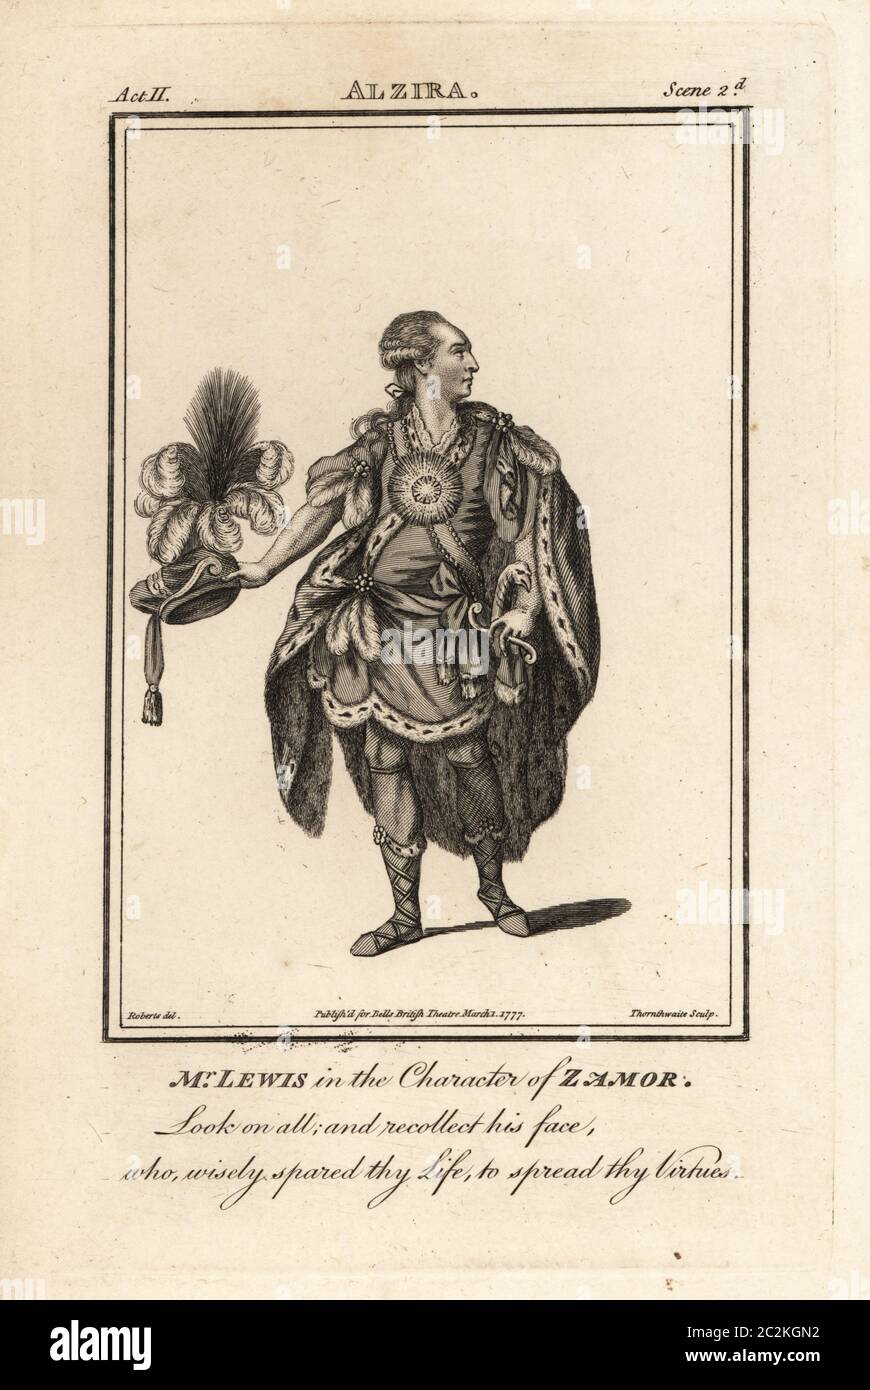 Mr. William Thomas Lewis in the character of Zamor in John Hill’s Alzira. However, Hill did not play the role in London. Copperplate engraving by J. Thornthwaite after an illustration by James Roberts from Bell’s British Theatre, Consisting of the most esteemed English Plays, John Bell, London, 1777. Stock Photo